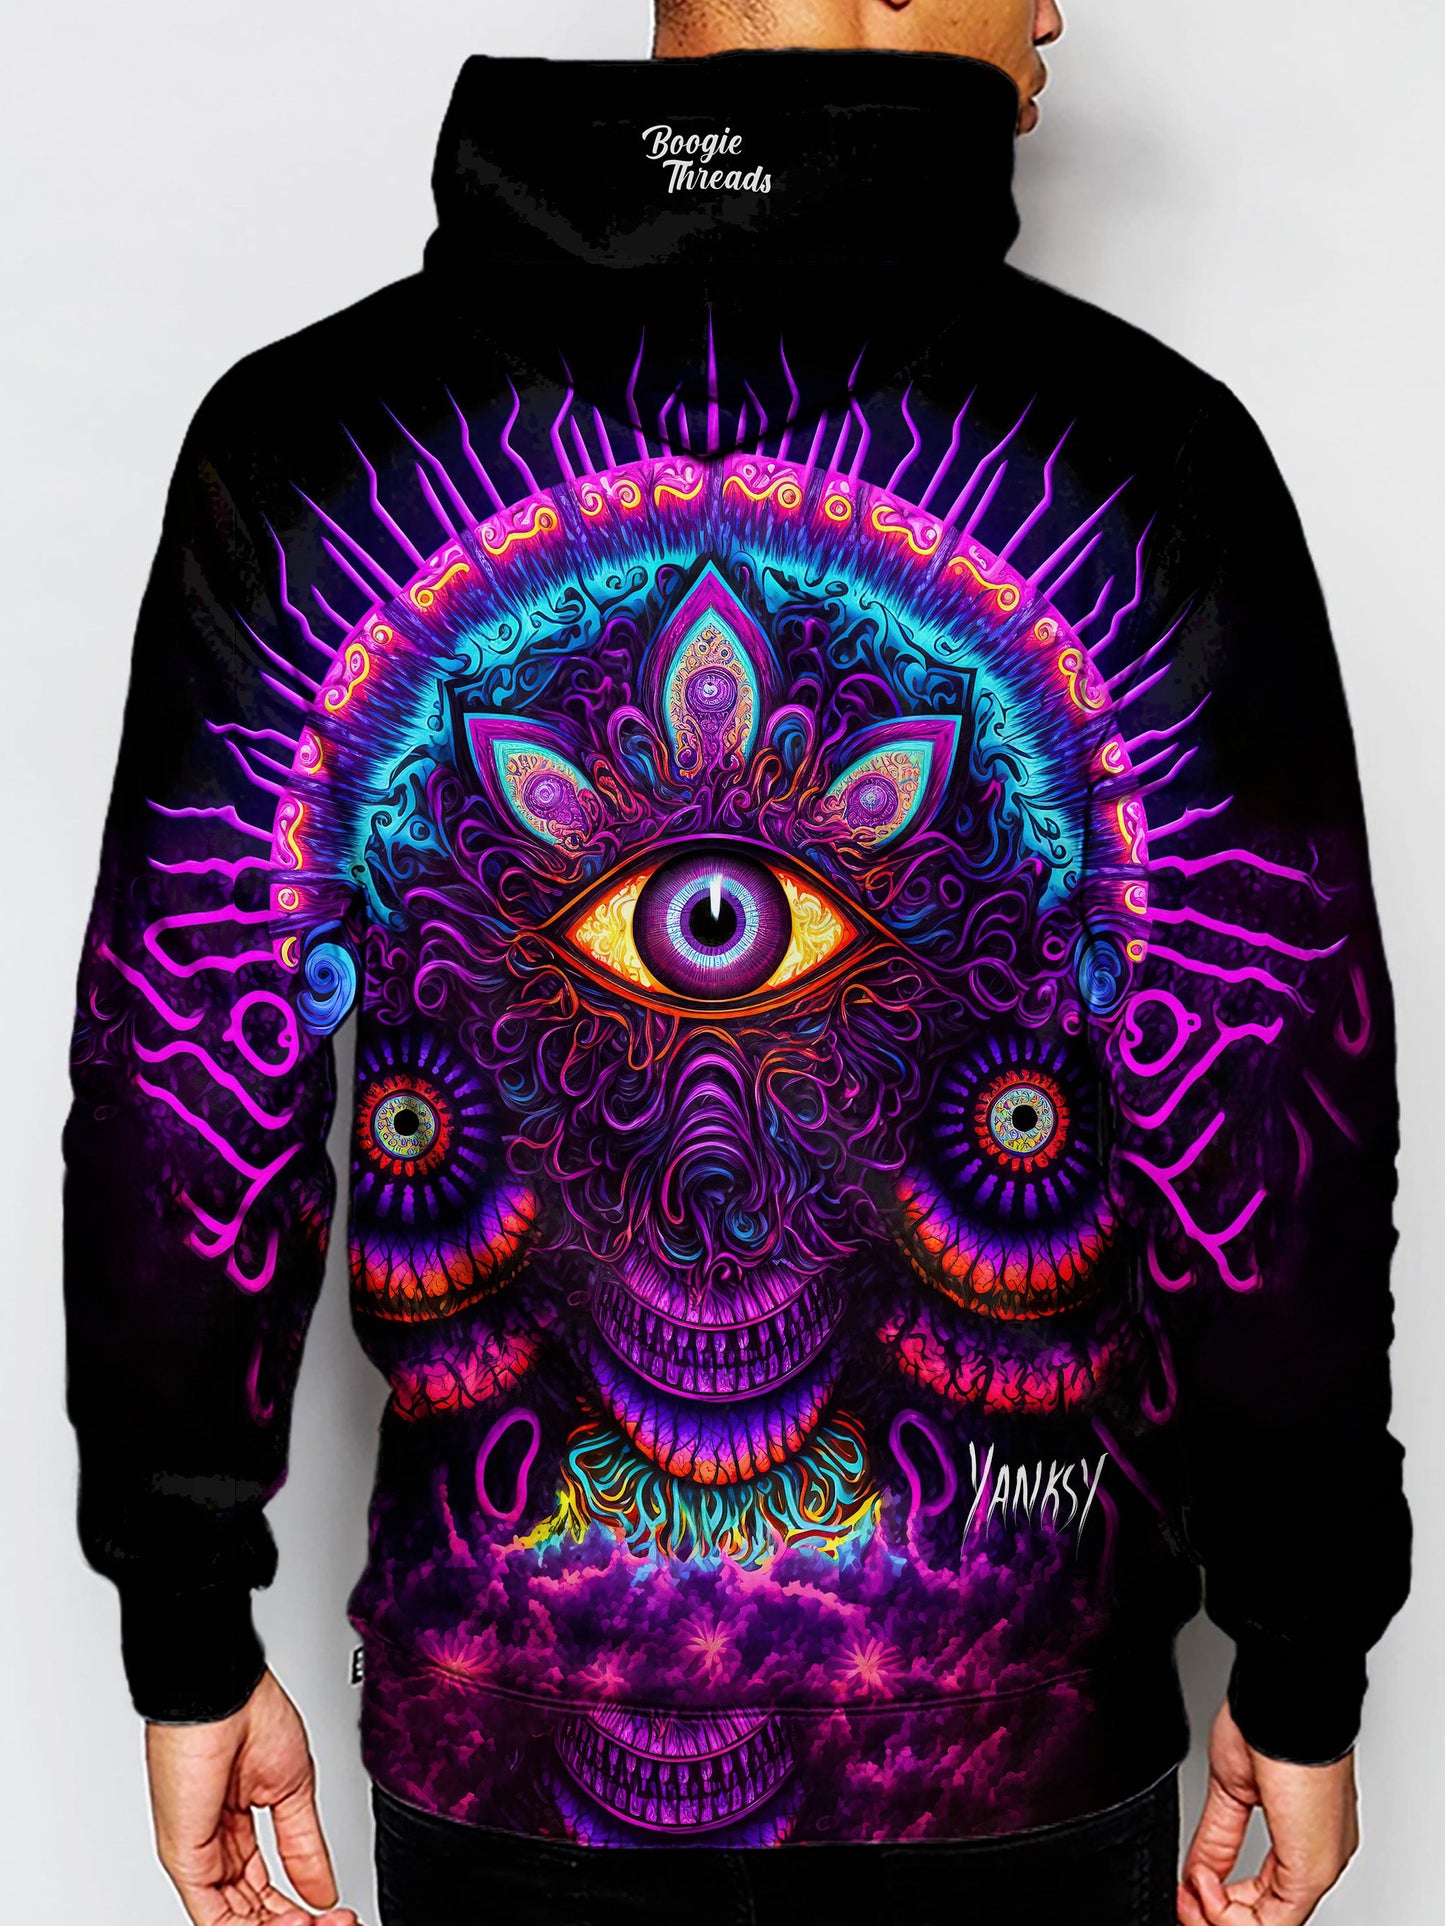 Get ready to enter a world of mesmerizing patterns and vibrant colors with this trippy hoodie